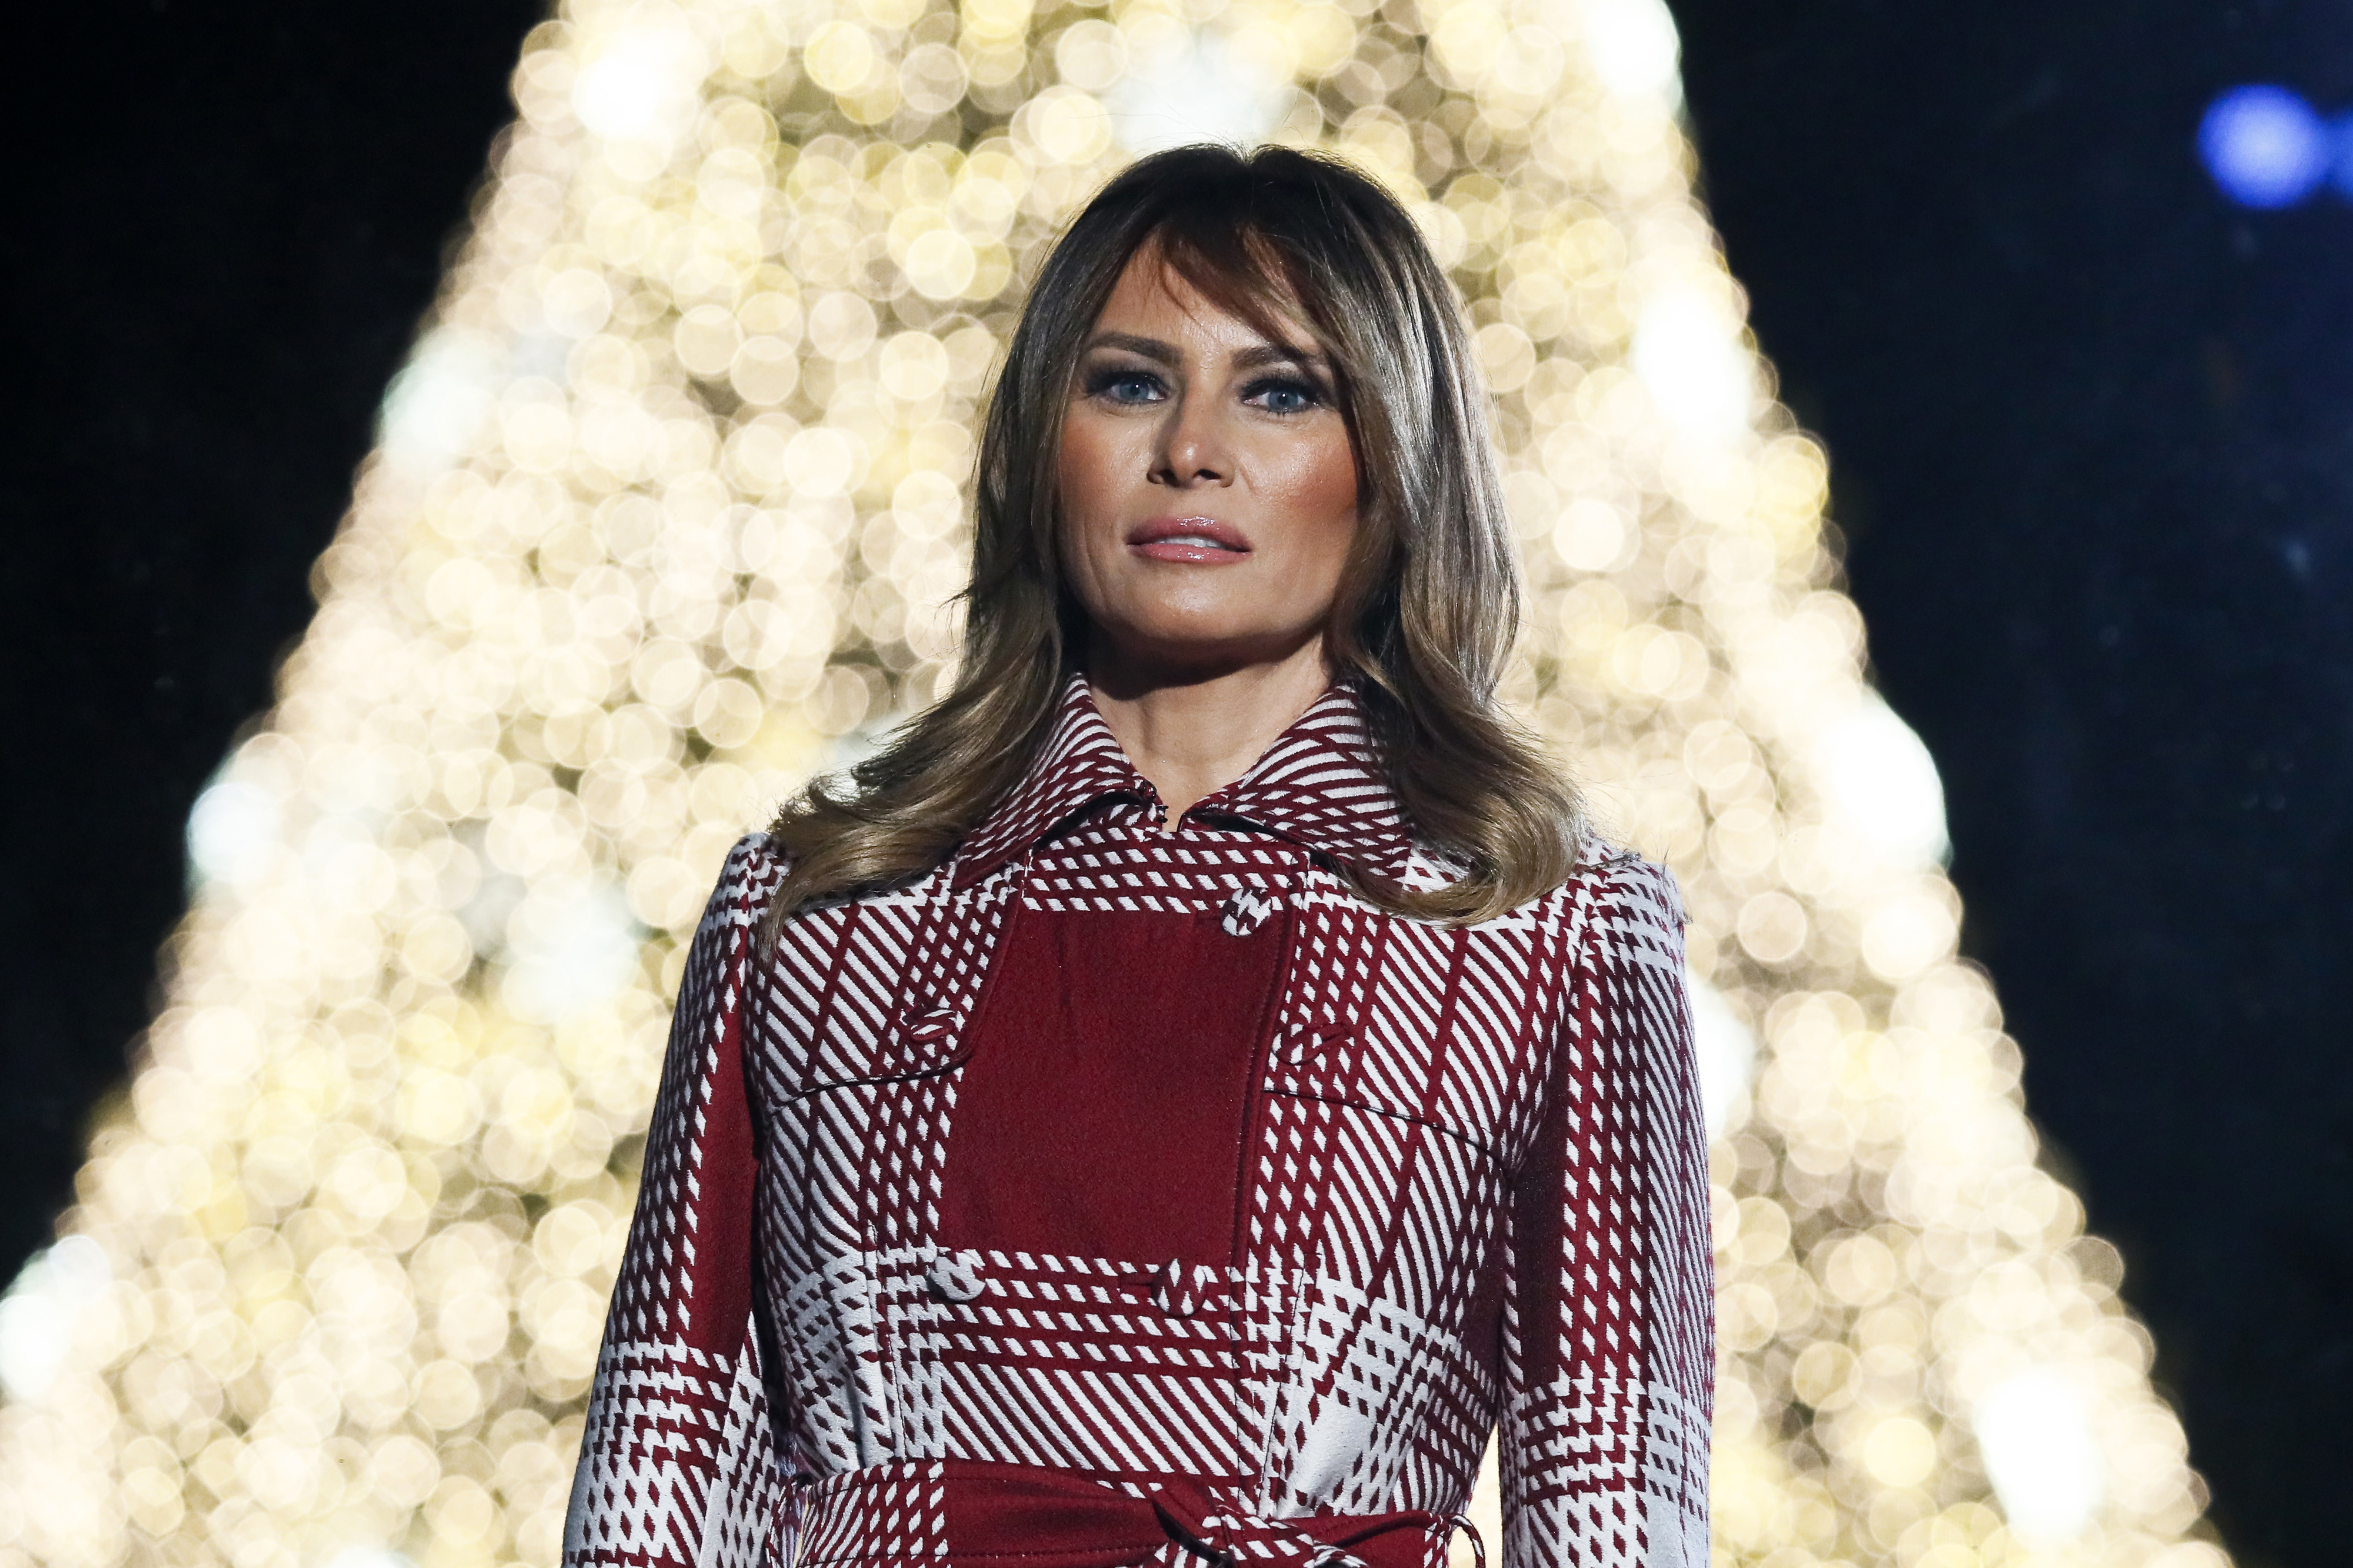 Melania in a plaid coat in front of a lit Christmas tree